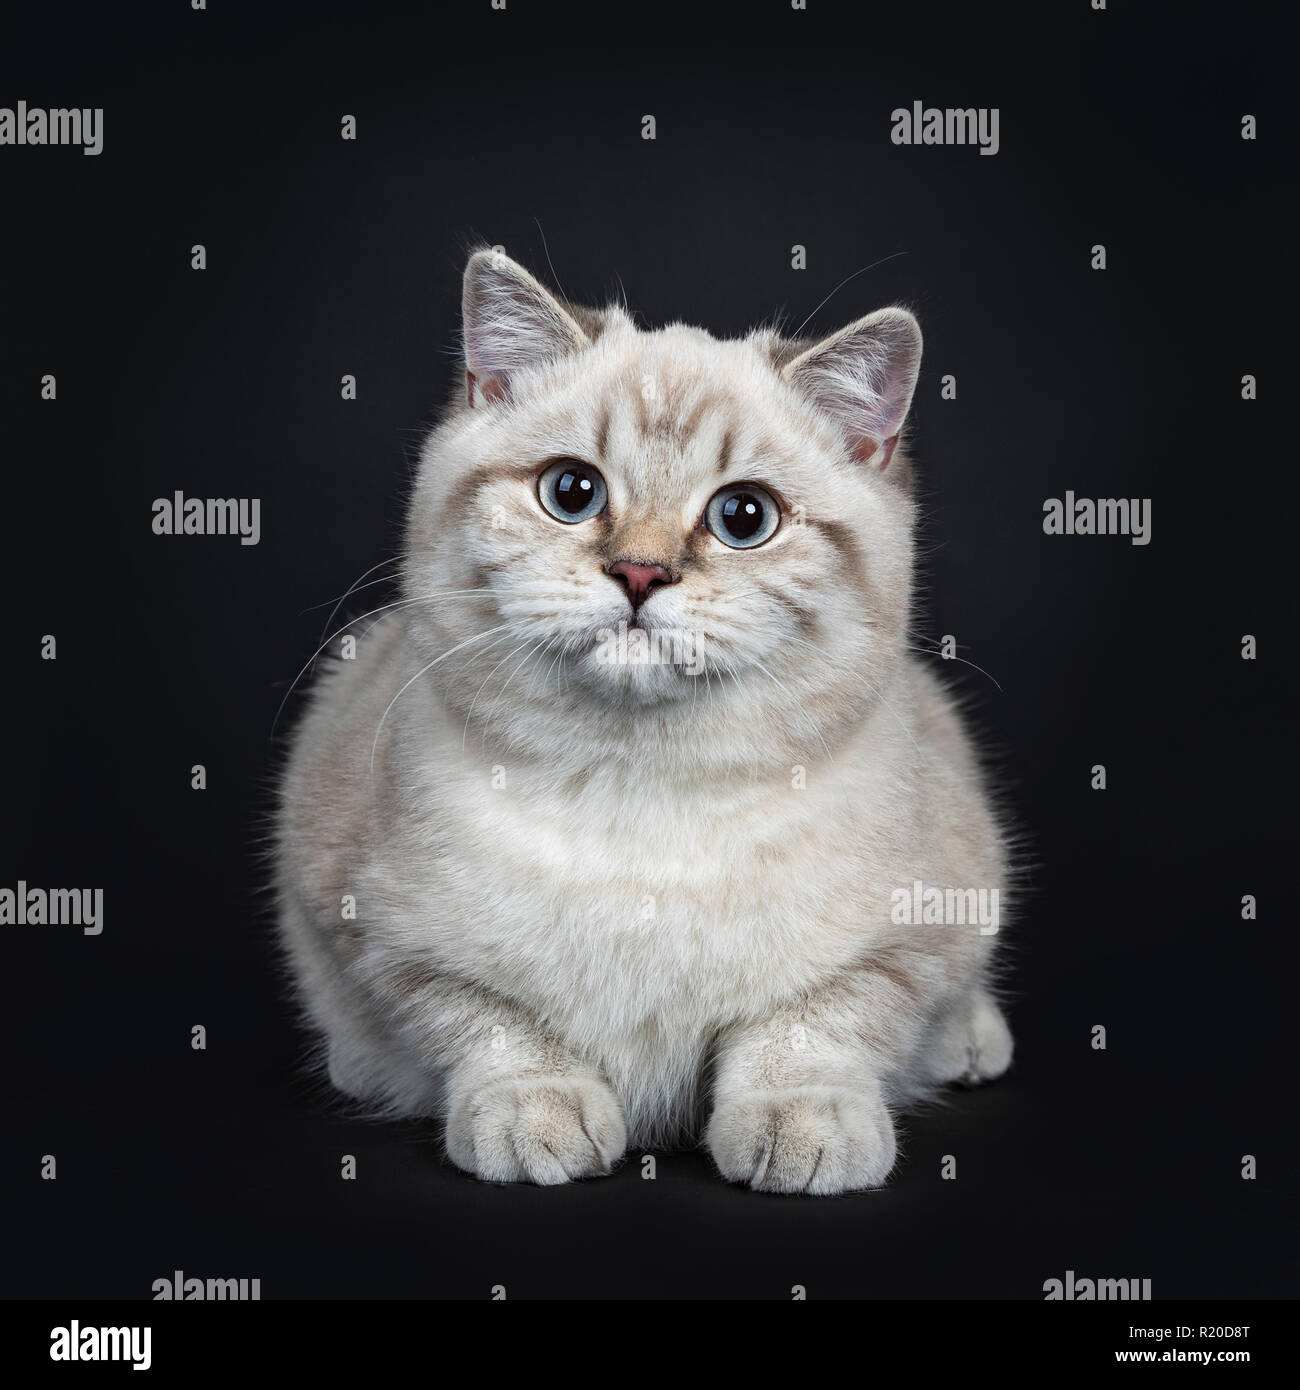 Super cute blue tabby point British Shorthair cat kitten laying down, looking at camera with light blue eyes. Isolated on black background. Stock Photo